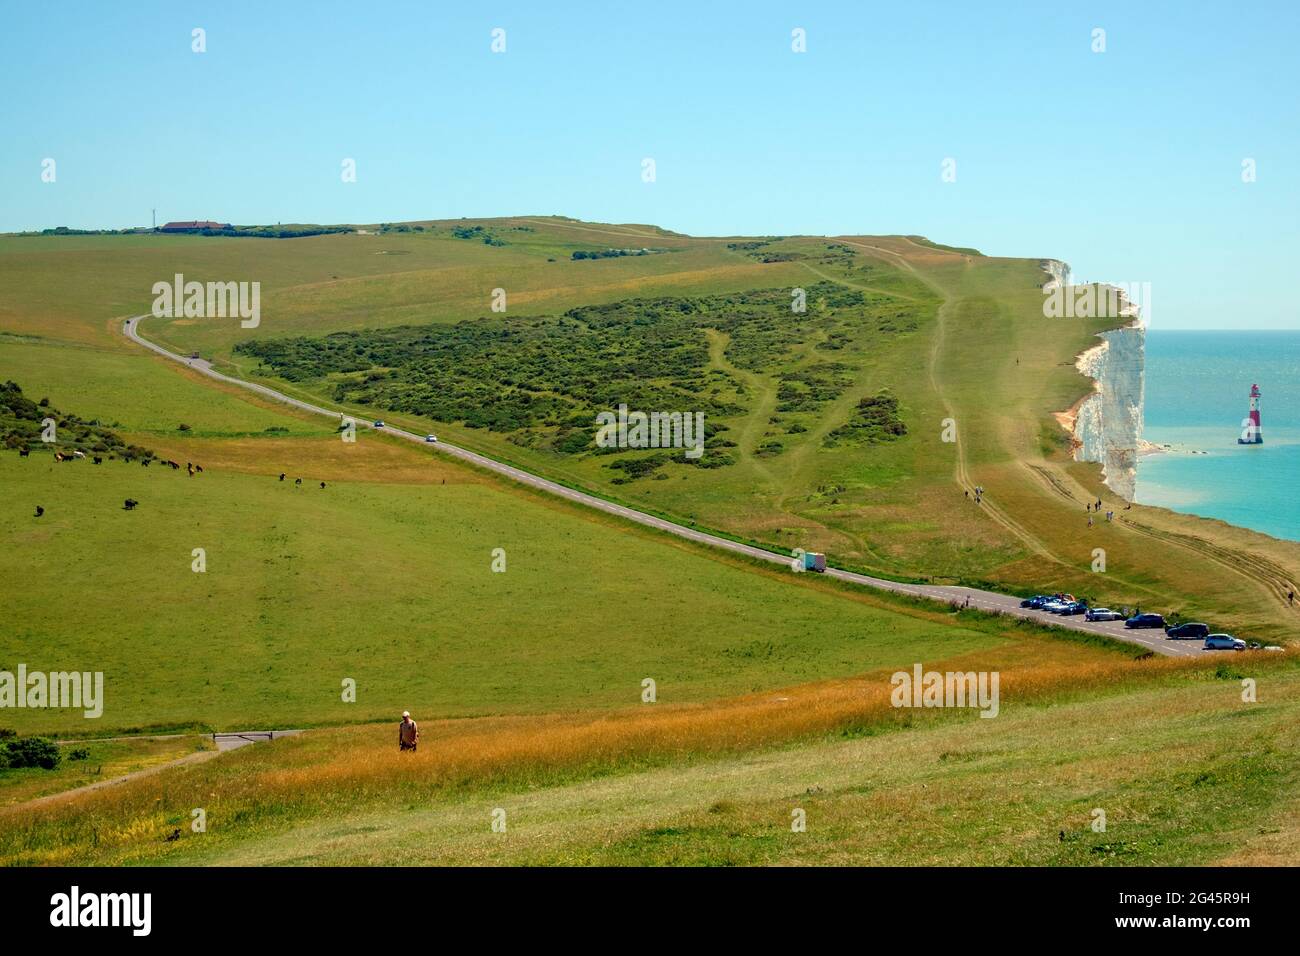 Staycation idea. Beachy Head Lighthouse in the English Channel with white chalk cliffs, Beachy Head Rd, Parked cars, grassland & tourists. East Sussex Stock Photo